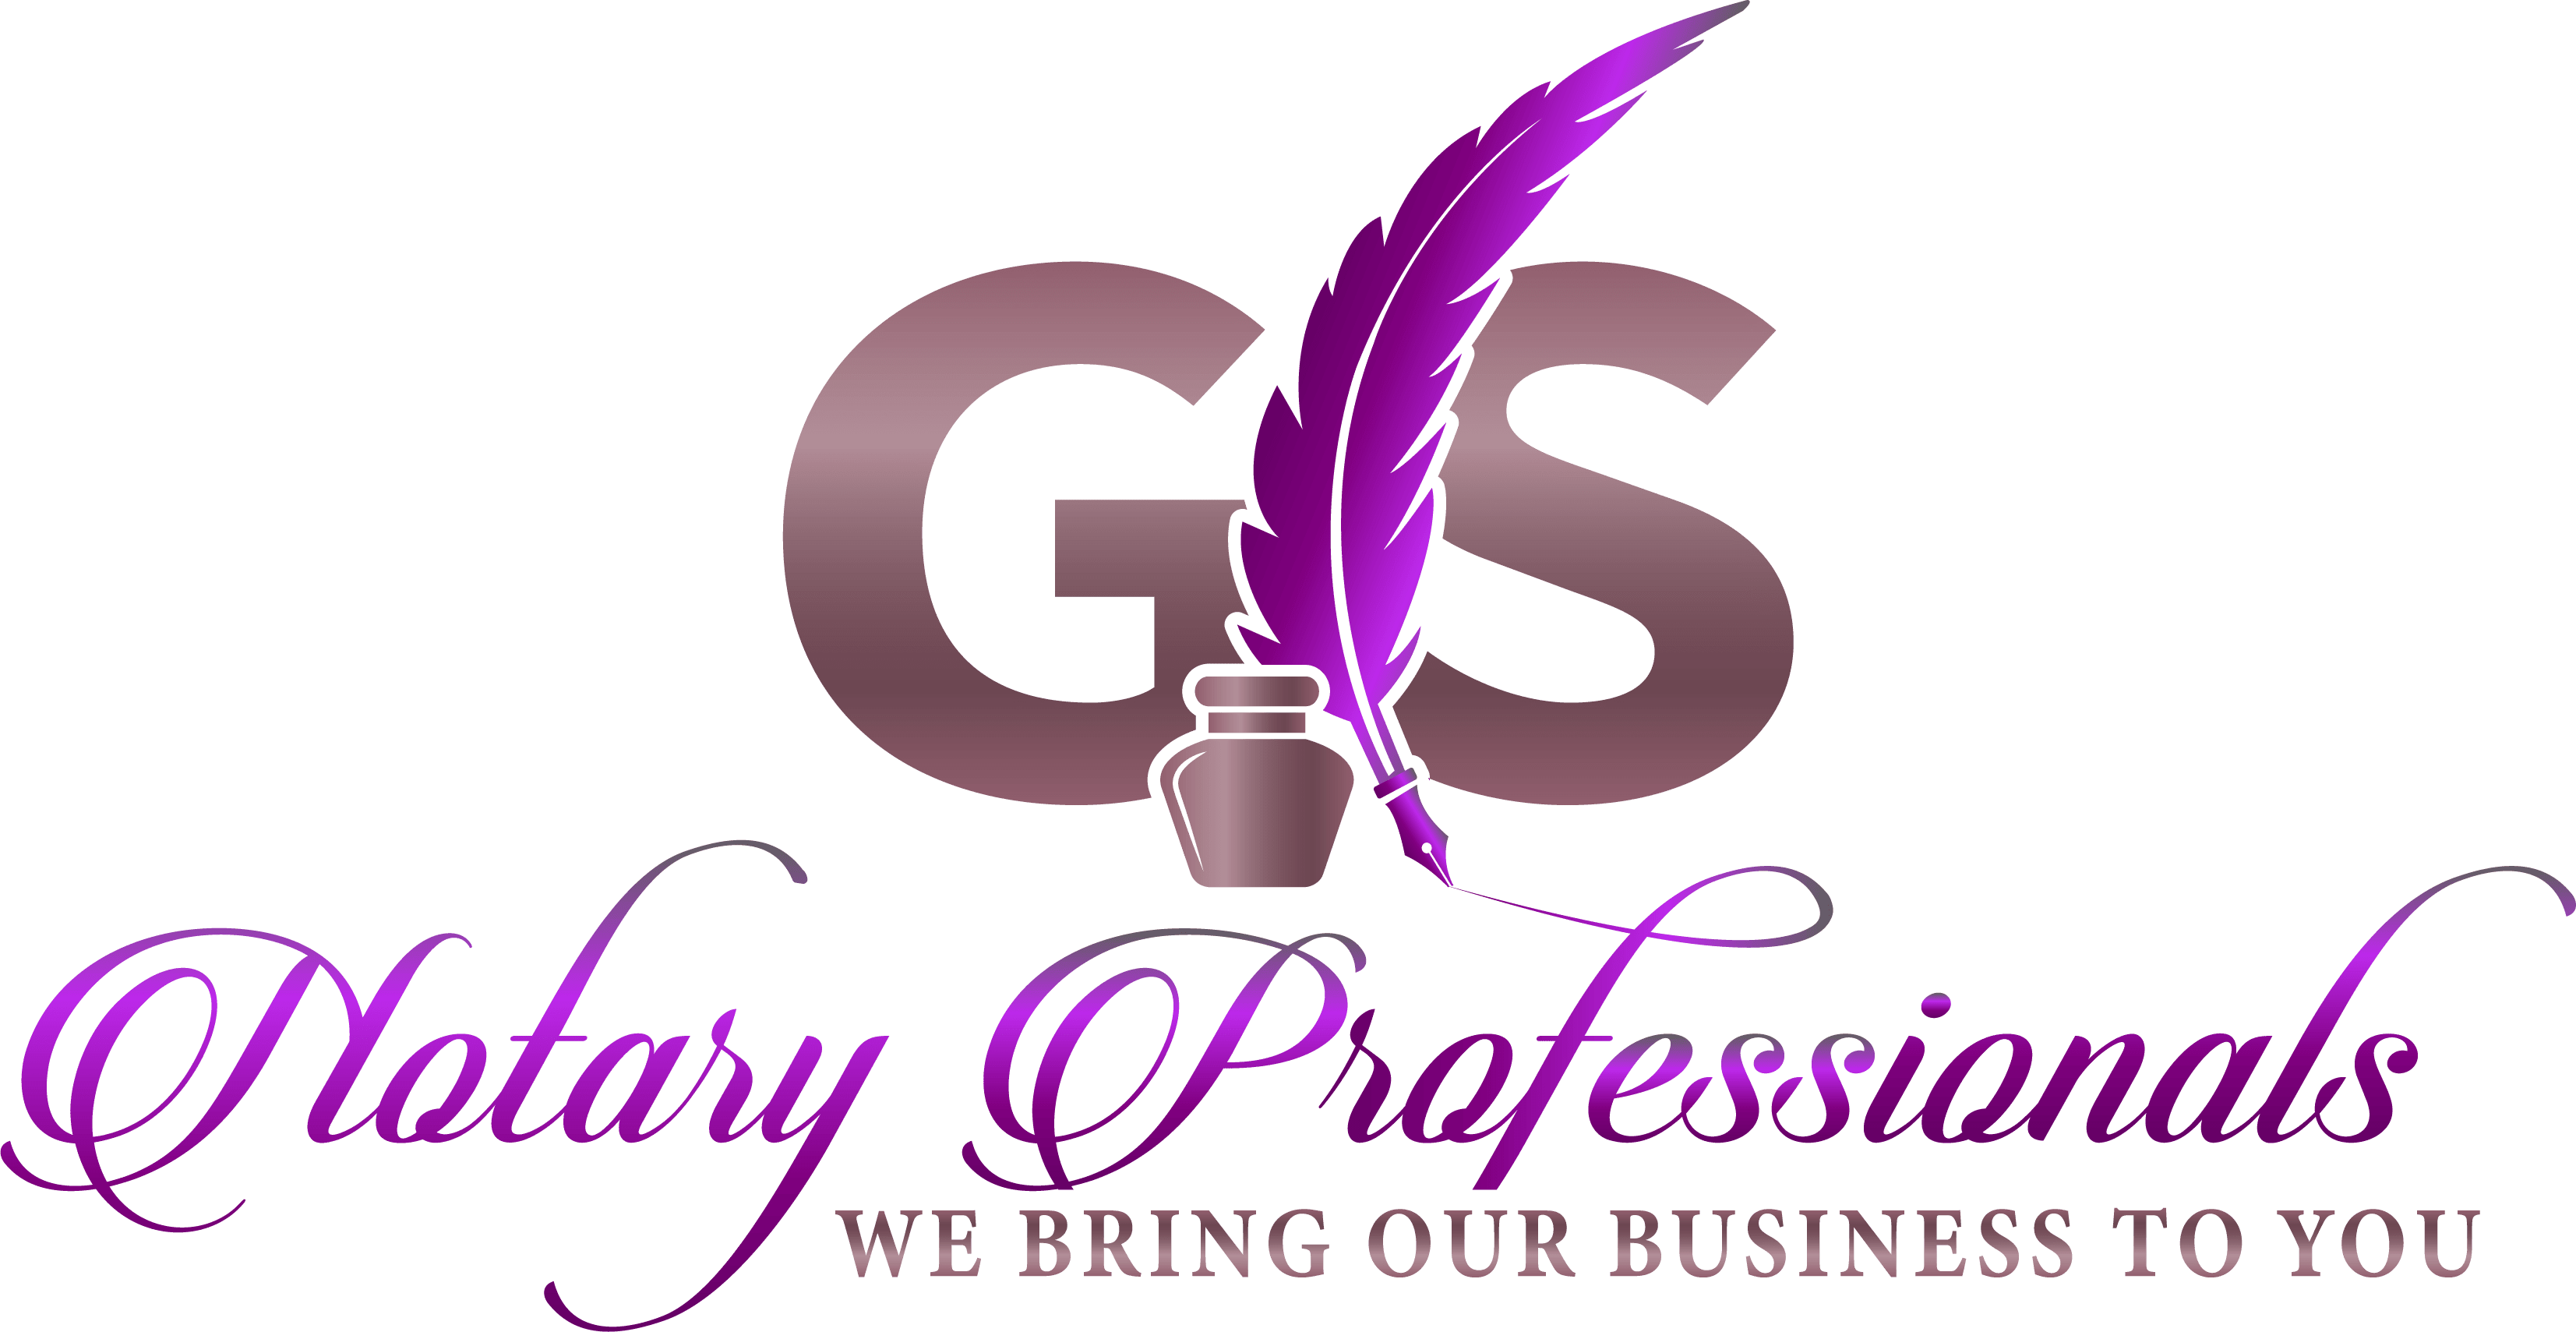 GS Notary Professionals, LLC